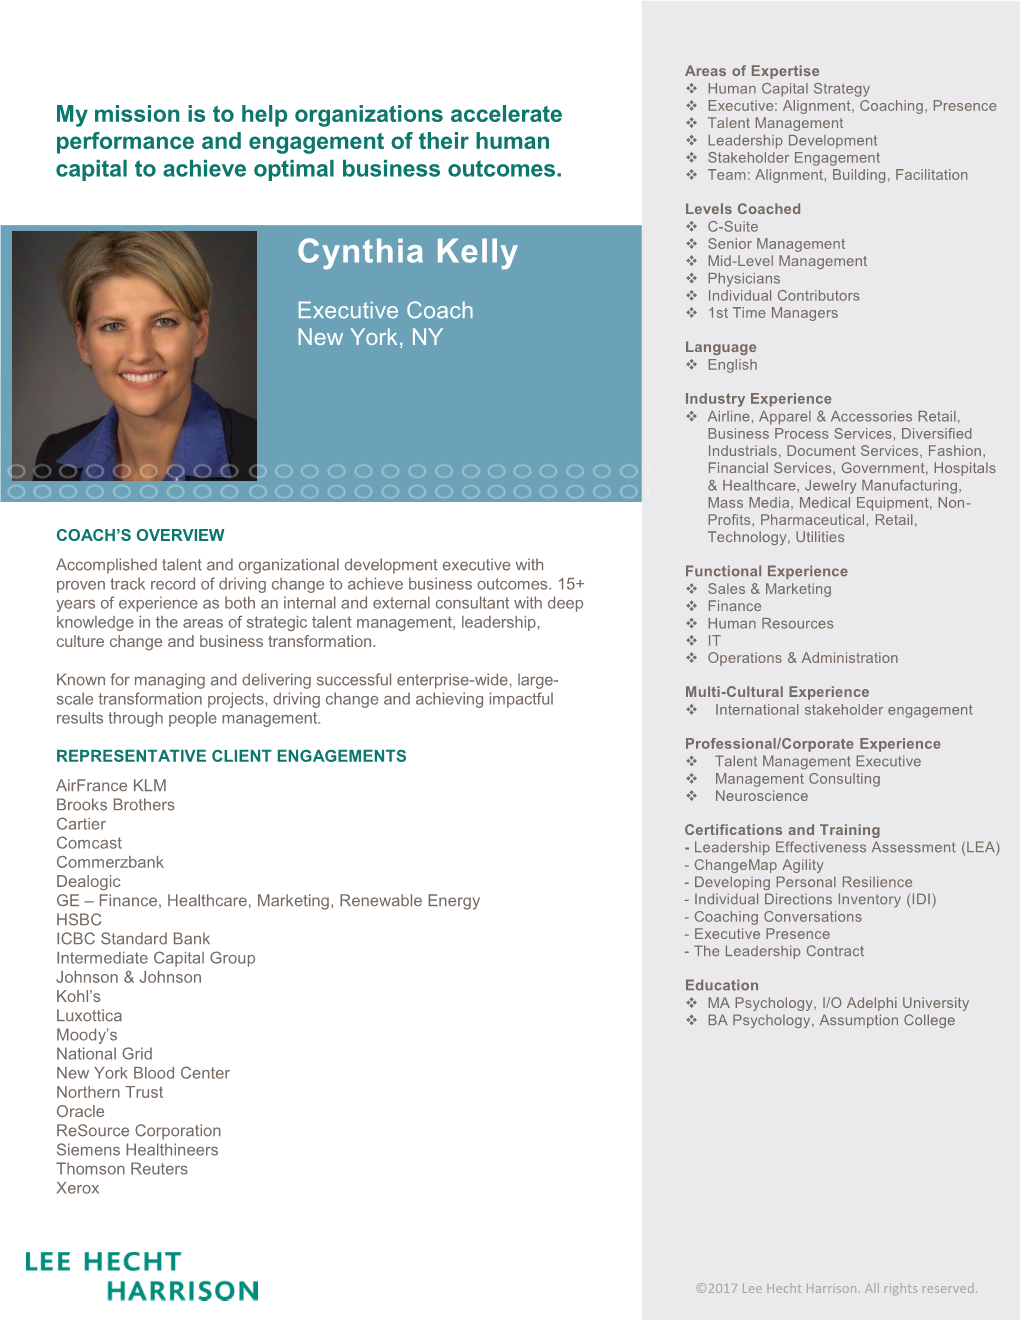 Cynthia Kelly  Mid-Level Management  Physicians  Individual Contributors Executive Coach  1St Time Managers